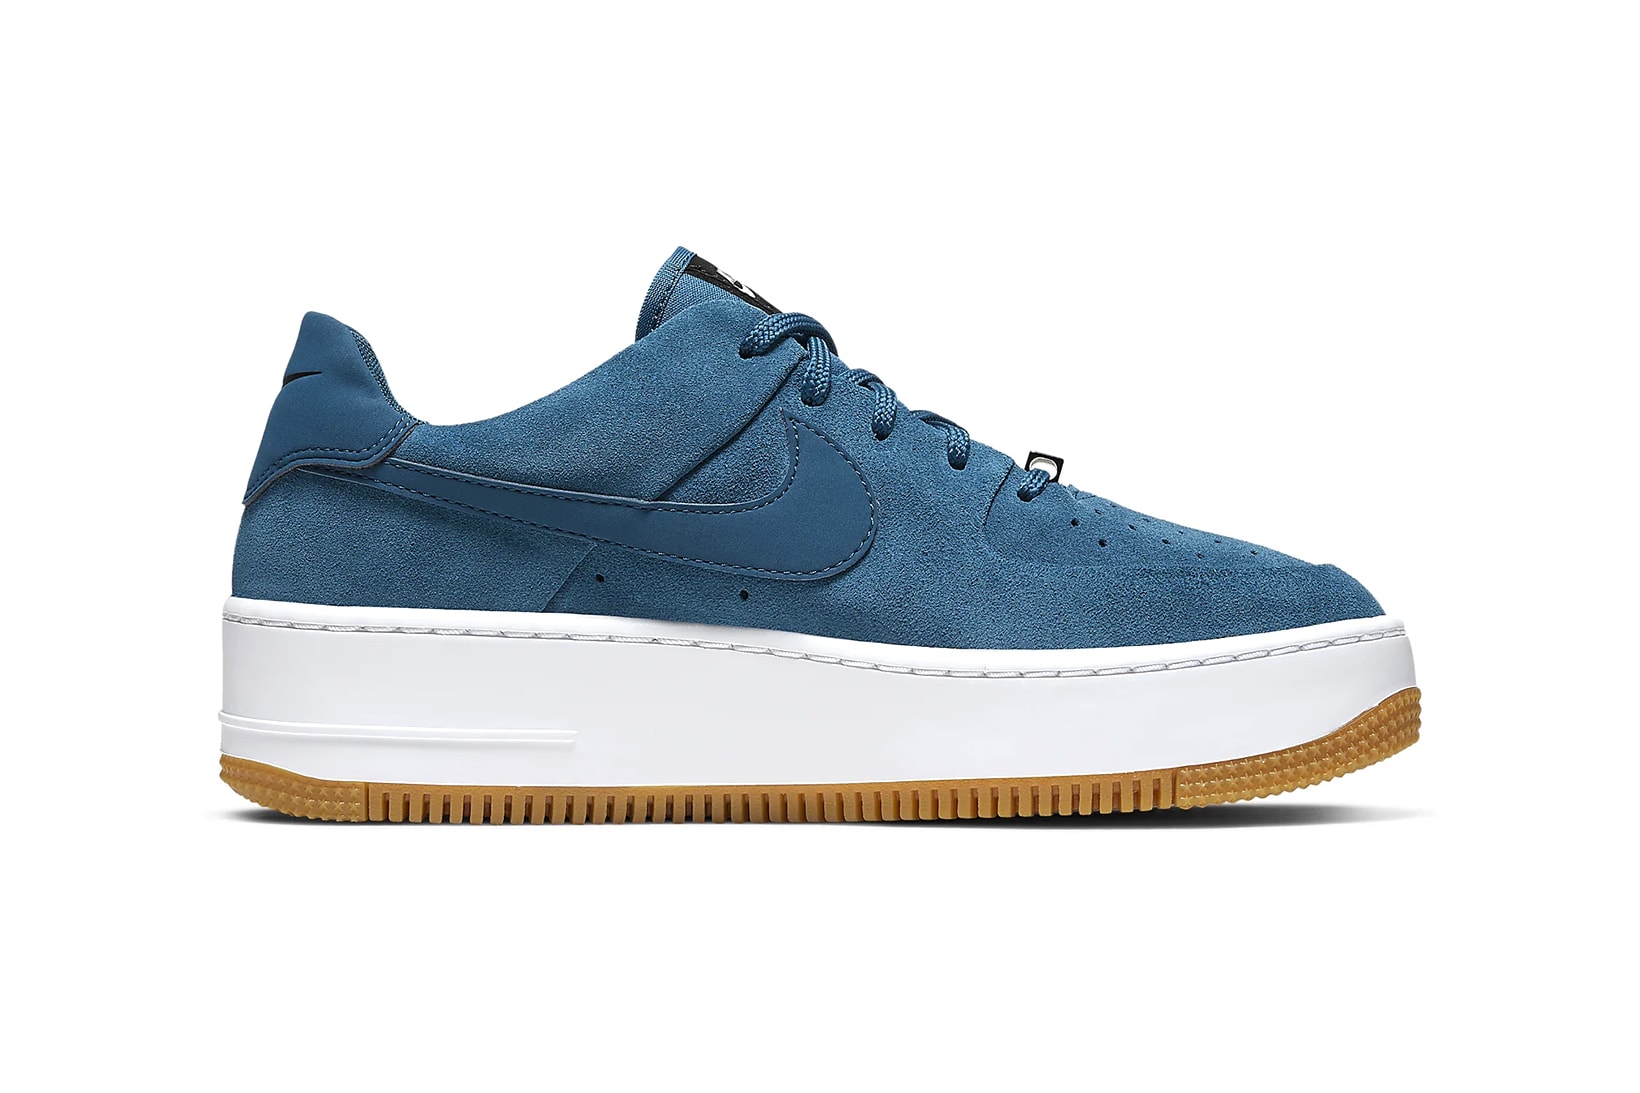 Nike Air Force 1 Sage Low Blue Force Black White Platform Women's Sneakers Trainers Suede elevated midsole gum sole